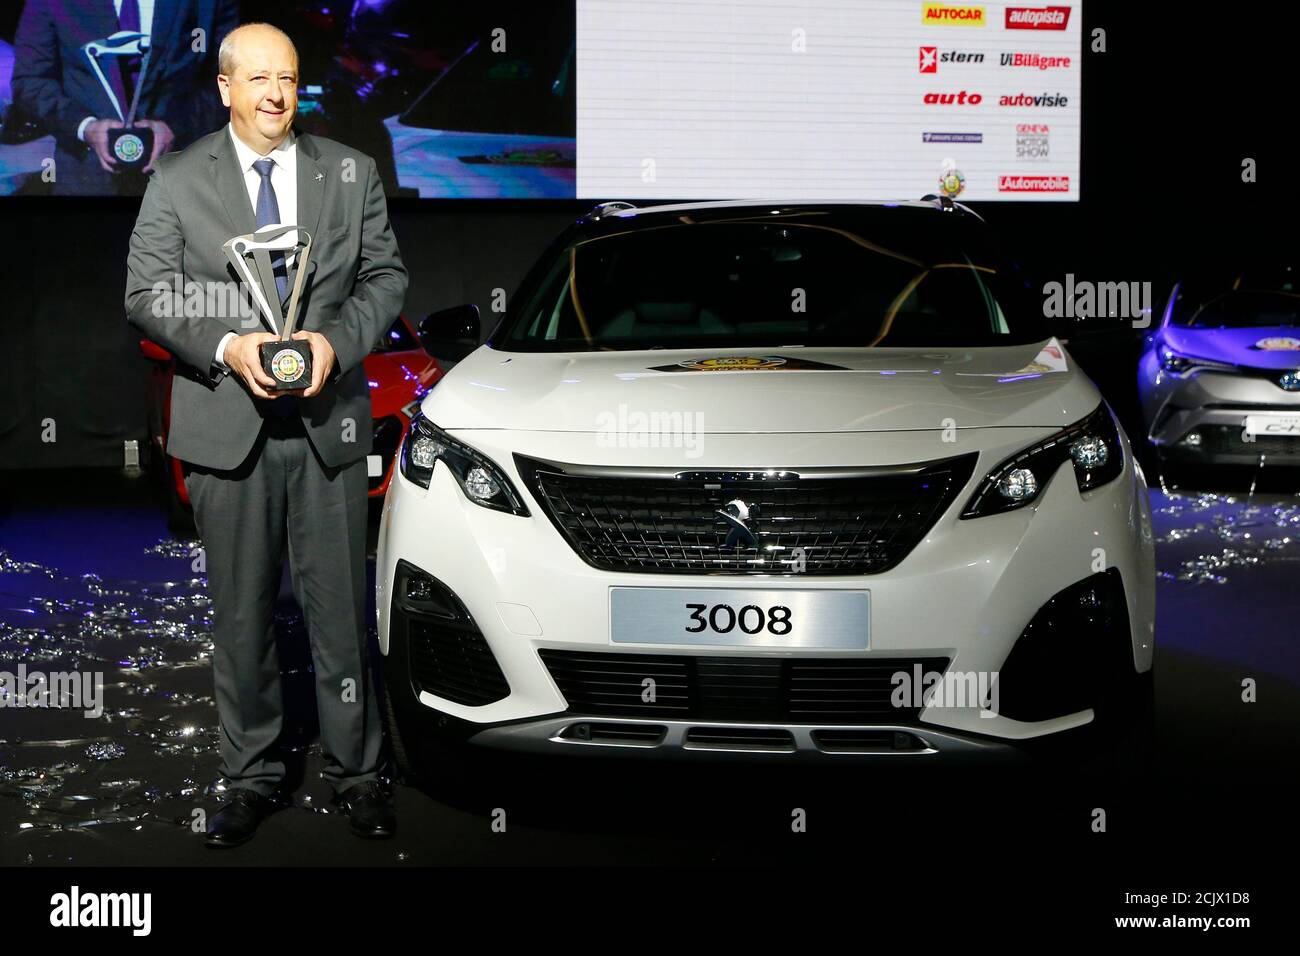 Jean-Philippe Imparato, CEO Peugeot brand, poses with the Car of the Year  award next to the Peugeot 3008 during the presentation, ahead of the 87th  International Motor Show at Palexpo in Geneva,